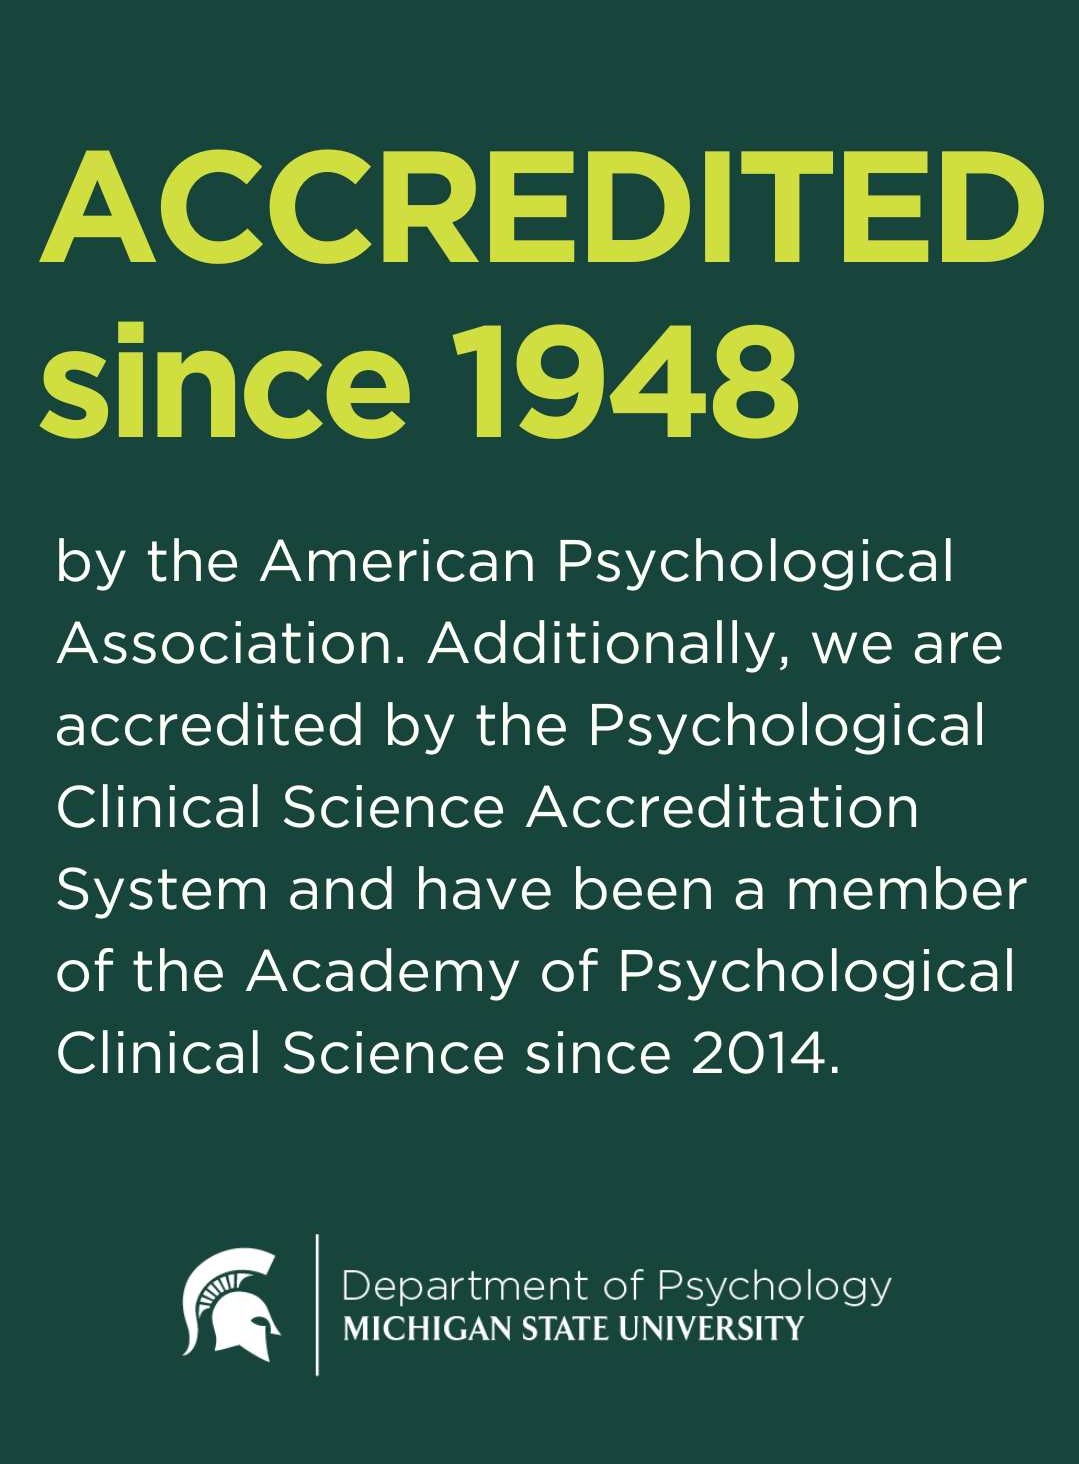 Green graphic that says Accredited since 1948